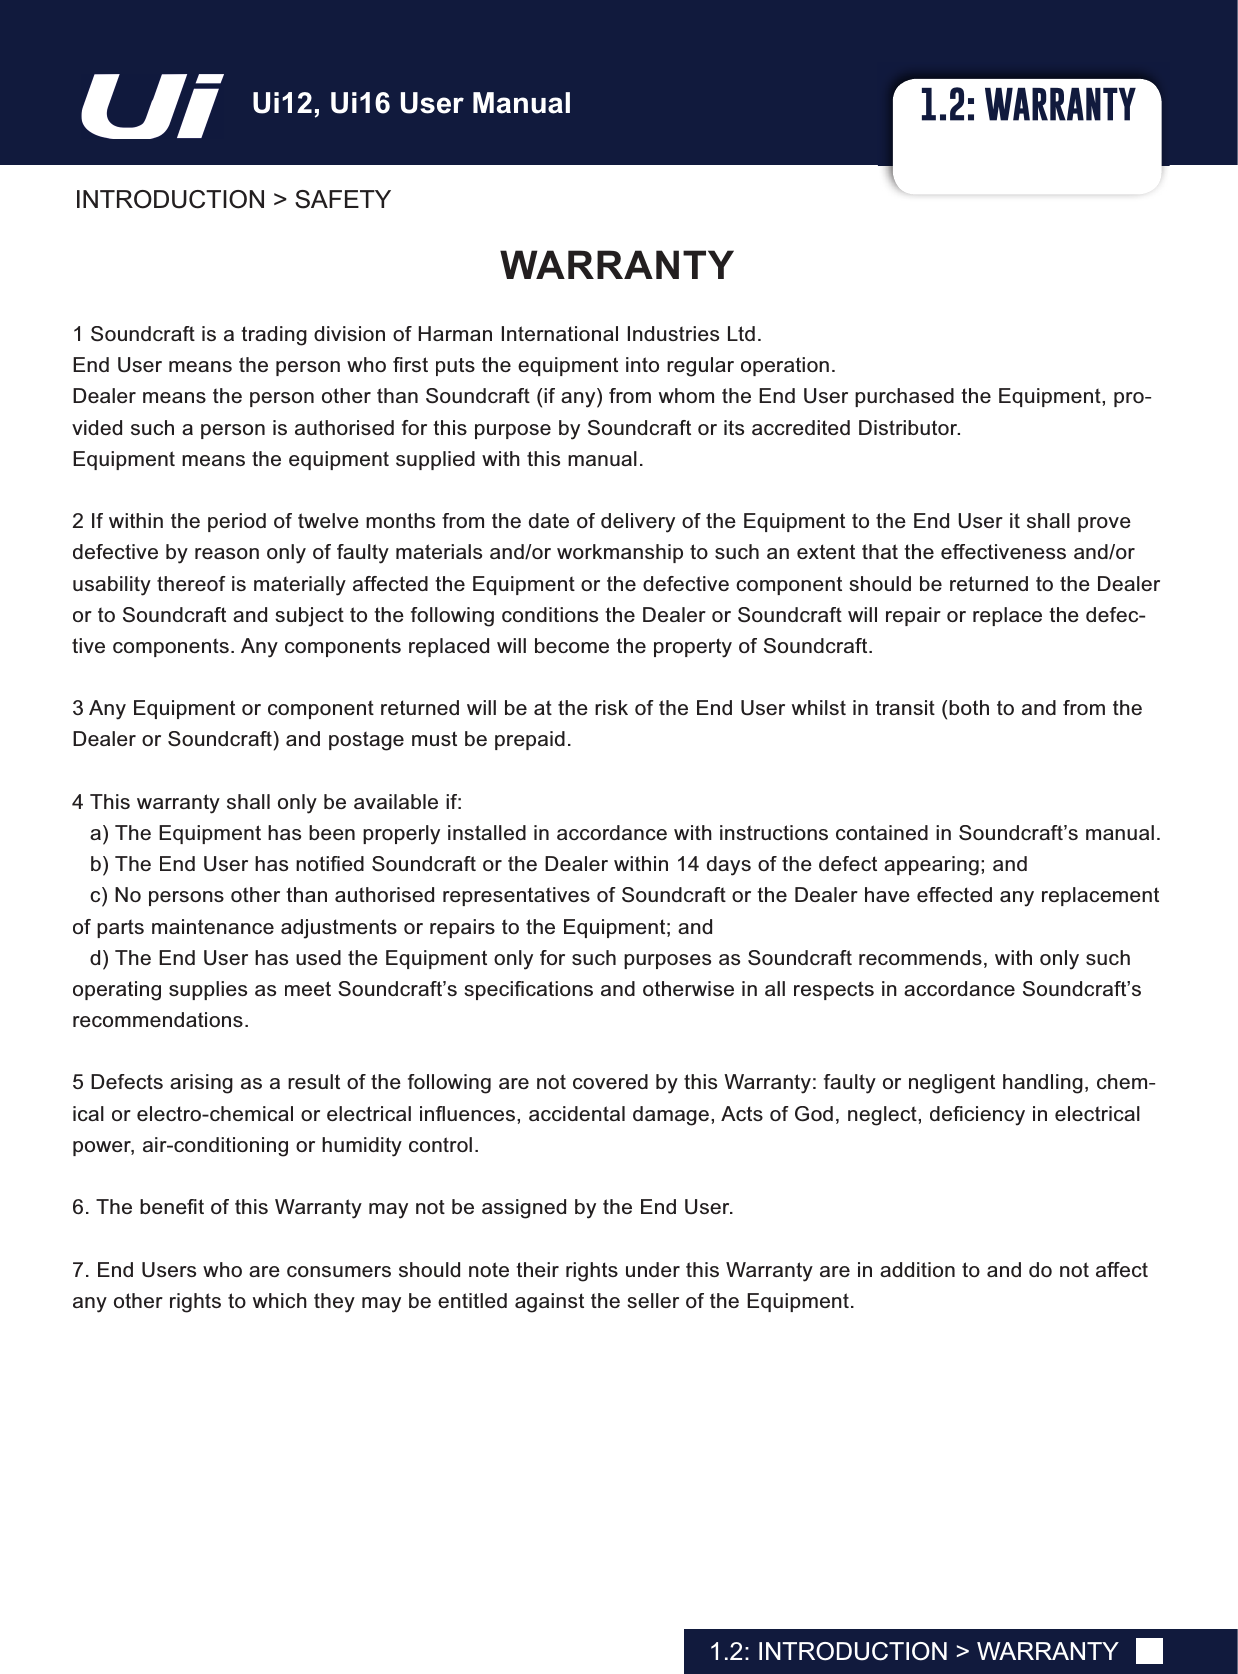 1.2: WARRANTYINTRODUCTION &gt; SAFETY1.2: INTRODUCTION &gt; WARRANTY:$55$17&lt;1 Soundcraft is a trading division of Harman International Industries Ltd.(QG8VHUPHDQVWKHSHUVRQZKR¿UVWSXWVWKHHTXLSPHQWLQWRUHJXODURSHUDWLRQDealer means the person other than Soundcraft (if any) from whom the End User purchased the Equipment, pro-vided such a person is authorised for this purpose by Soundcraft or its accredited Distributor.Equipment means the equipment supplied with this manual.2 If within the period of twelve months from the date of delivery of the Equipment to the End User it shall prove defective by reason only of faulty materials and/or workmanship to such an extent that the effectiveness and/or usability thereof is materially affected the Equipment or the defective component should be returned to the Dealer or to Soundcraft and subject to the following conditions the Dealer or Soundcraft will repair or replace the defec-tive components. Any components replaced will become the property of Soundcraft.3 Any Equipment or component returned will be at the risk of the End User whilst in transit (both to and from the Dealer or Soundcraft) and postage must be prepaid.4 This warranty shall only be available if:a) The Equipment has been properly installed in accordance with instructions contained in Soundcraft’s manual.E7KH(QG8VHUKDVQRWL¿HG6RXQGFUDIWRUWKH&apos;HDOHUZLWKLQGD\VRIWKHGHIHFWDSSHDULQJDQGc) No persons other than authorised representatives of Soundcraft or the Dealer have effected any replacement of parts maintenance adjustments or repairs to the Equipment; andd) The End User has used the Equipment only for such purposes as Soundcraft recommends, with only such RSHUDWLQJVXSSOLHVDVPHHW6RXQGFUDIW¶VVSHFL¿FDWLRQVDQGRWKHUZLVHLQDOOUHVSHFWVLQDFFRUGDQFH6RXQGFUDIW¶Vrecommendations.5 Defects arising as a result of the following are not covered by this Warranty: faulty or negligent handling, chem-LFDORUHOHFWURFKHPLFDORUHOHFWULFDOLQÀXHQFHVDFFLGHQWDOGDPDJH$FWVRI*RGQHJOHFWGH¿FLHQF\LQHOHFWULFDOpower, air-conditioning or humidity control.7KHEHQH¿WRIWKLV:DUUDQW\PD\QRWEHDVVLJQHGE\WKH(QG8VHU7. End Users who are consumers should note their rights under this Warranty are in addition to and do not affect any other rights to which they may be entitled against the seller of the Equipment.8L8L8VHU0DQXDO